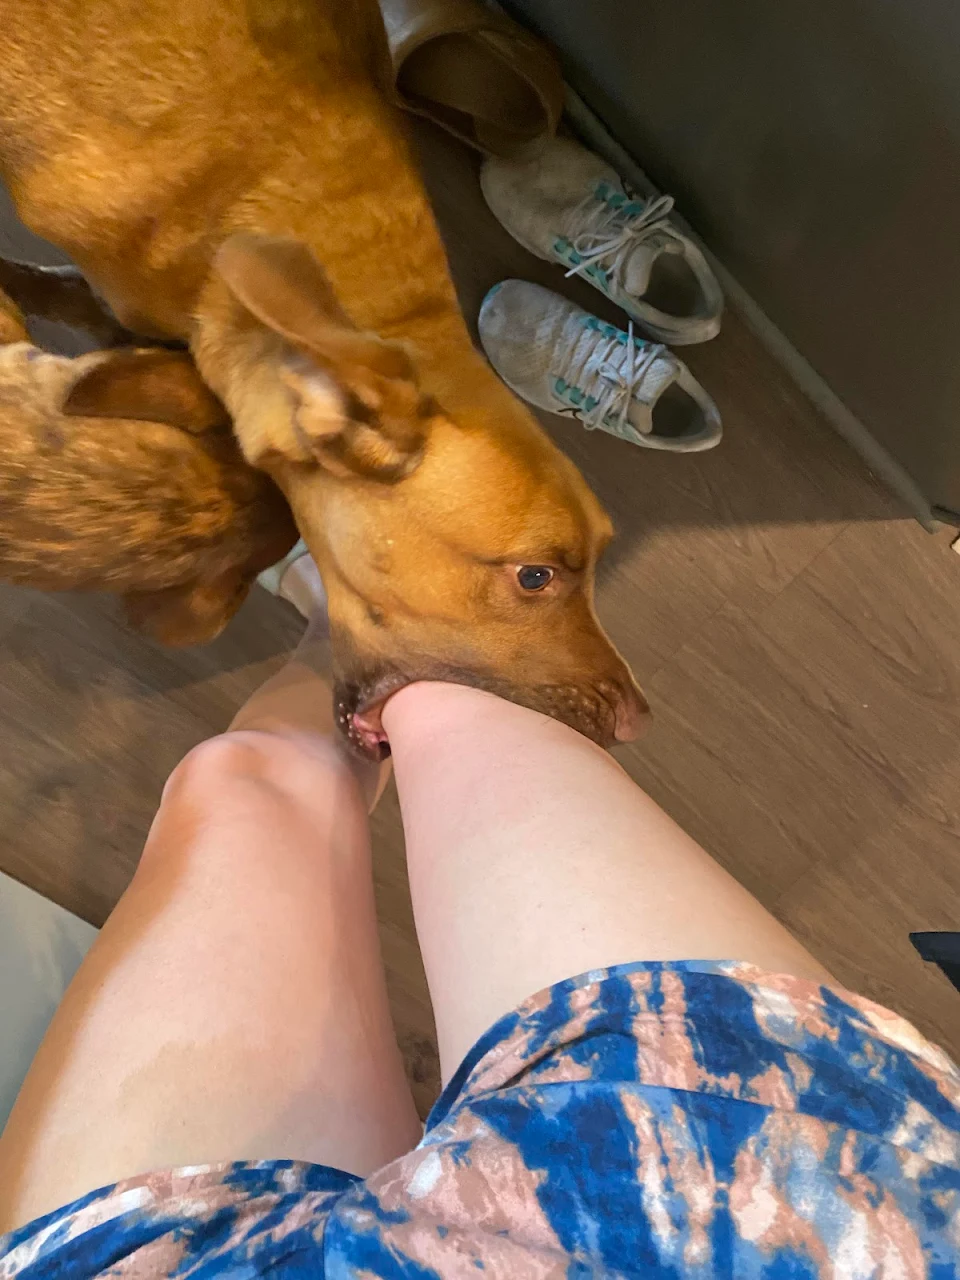 My friend’s dog gently puts your knee into his mouth when he is happy to see you